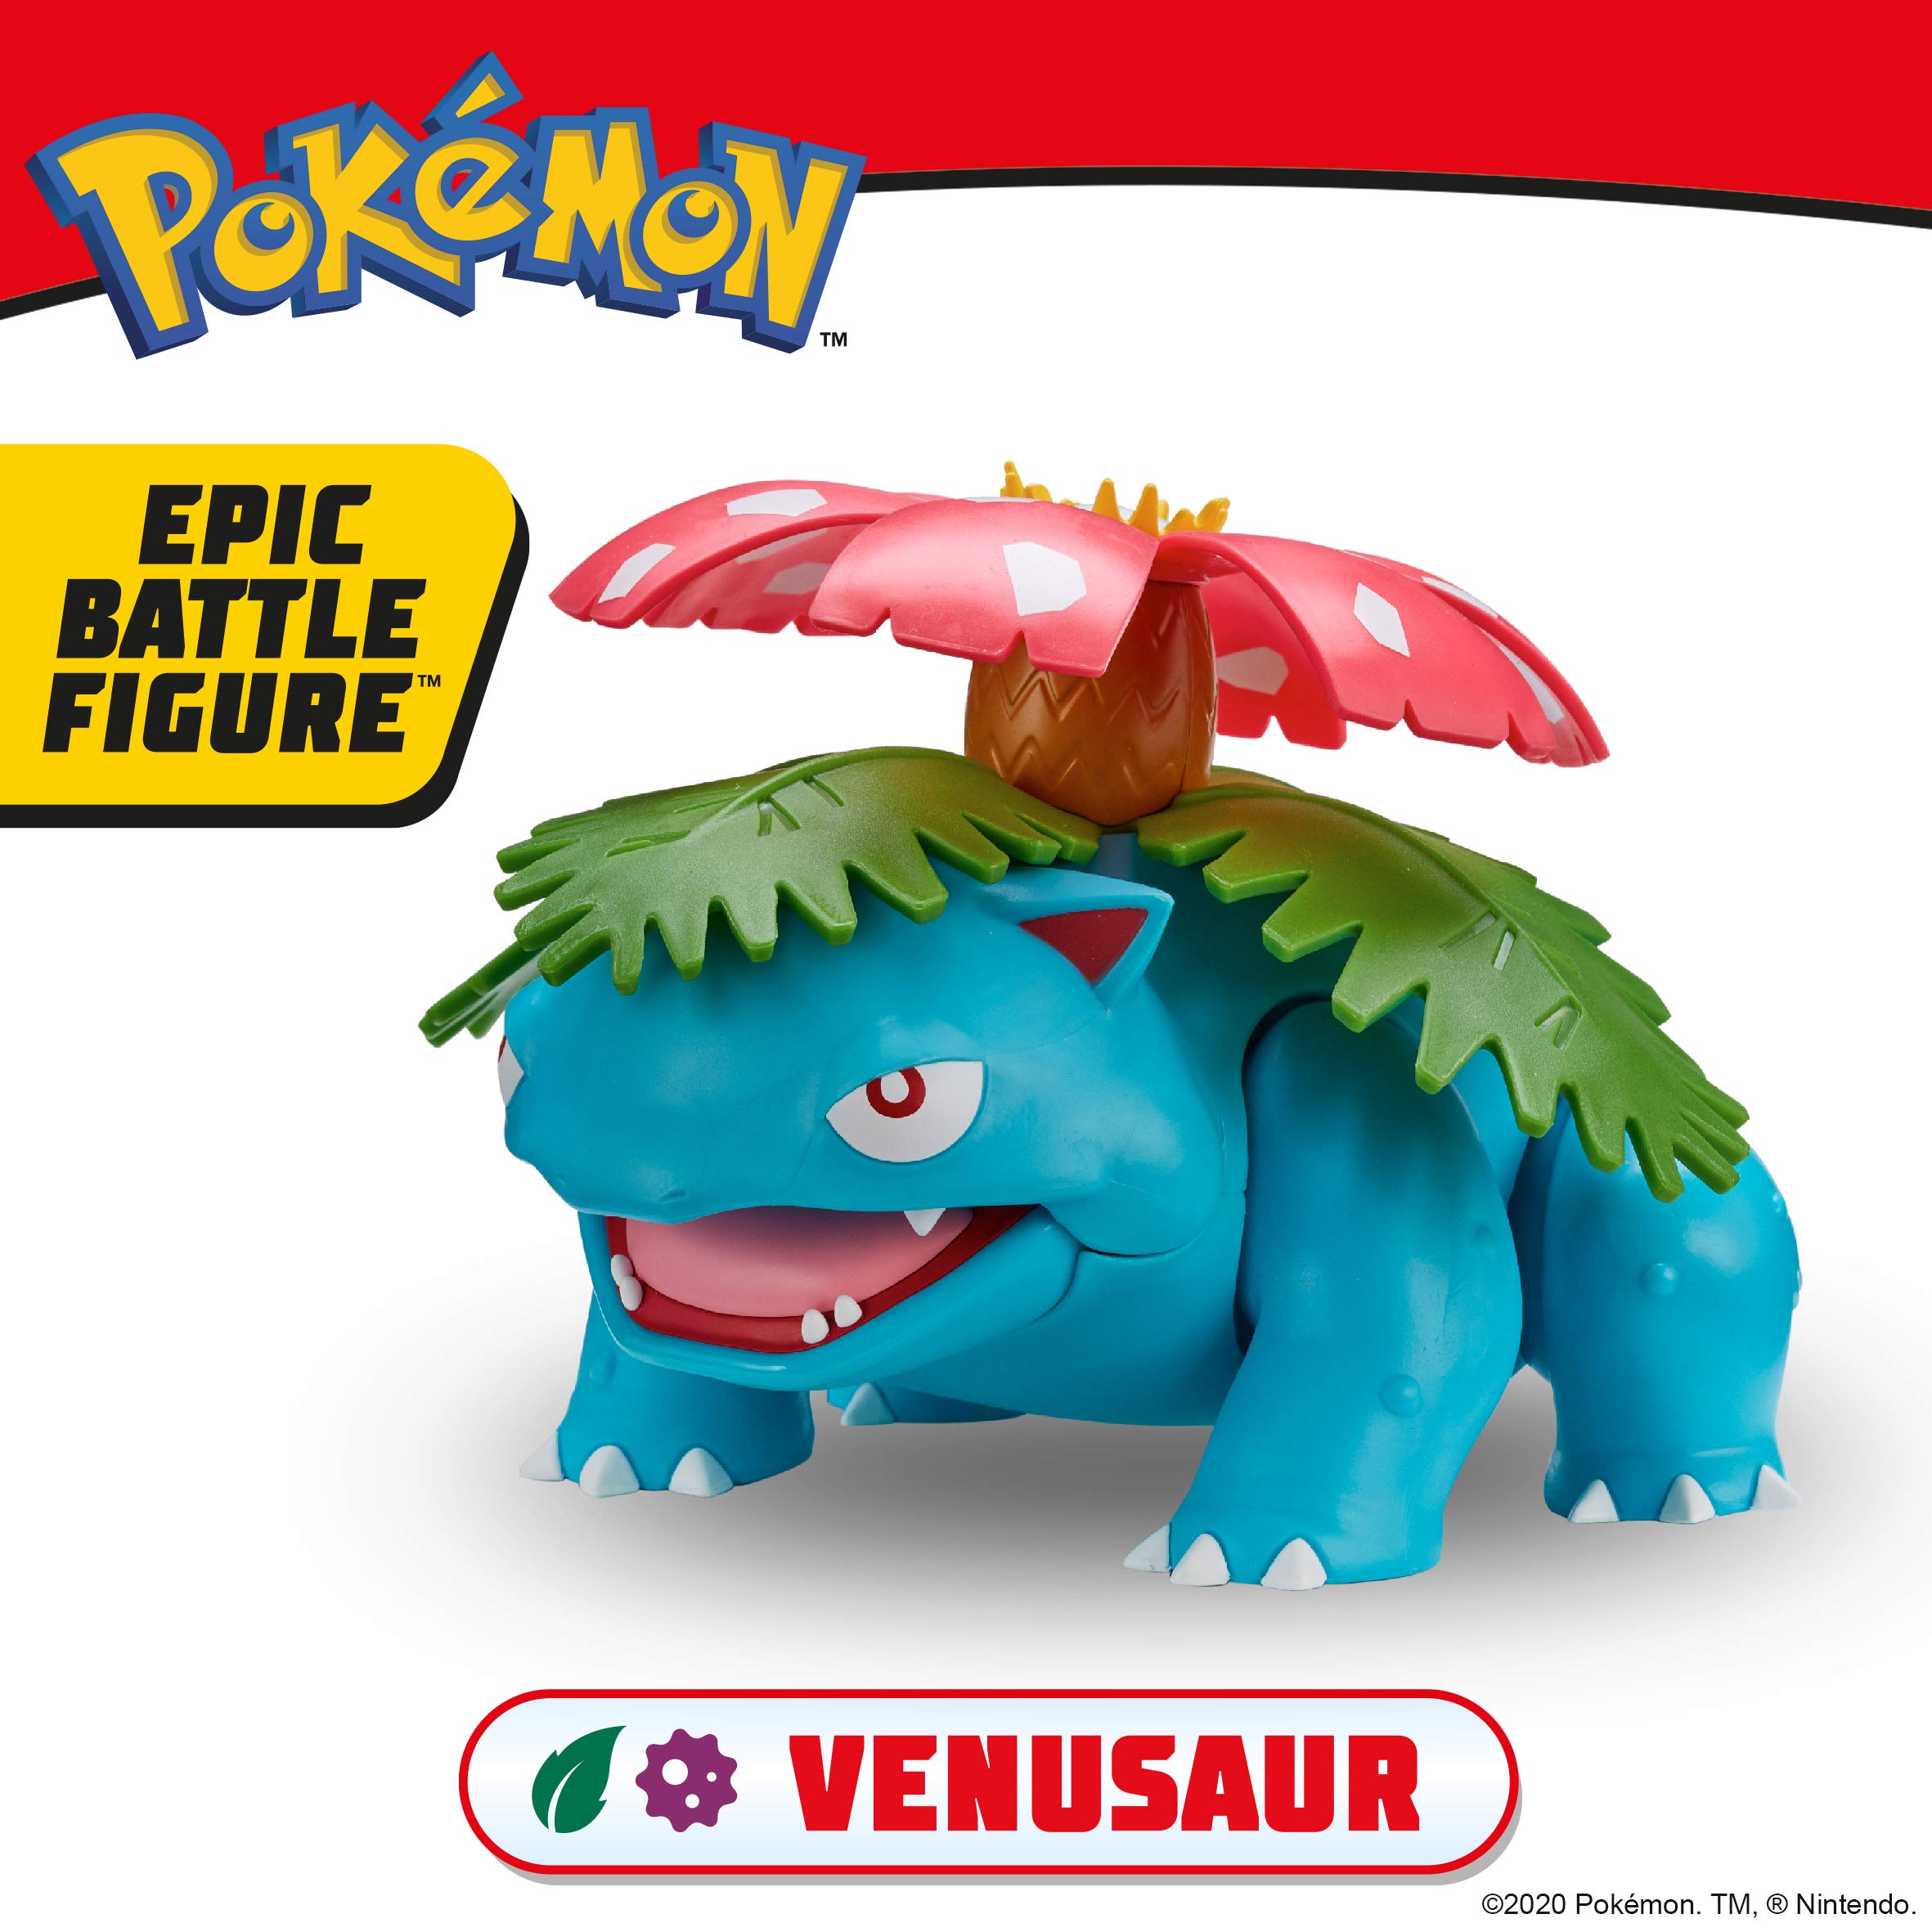 Pokemon Venusaur 12-Inch Epic Battle Figure - Authentic Details, Fully Articulated Figure Toys Inspired By Smash-Hit Animated Series - Gotta Catch ‘Em All